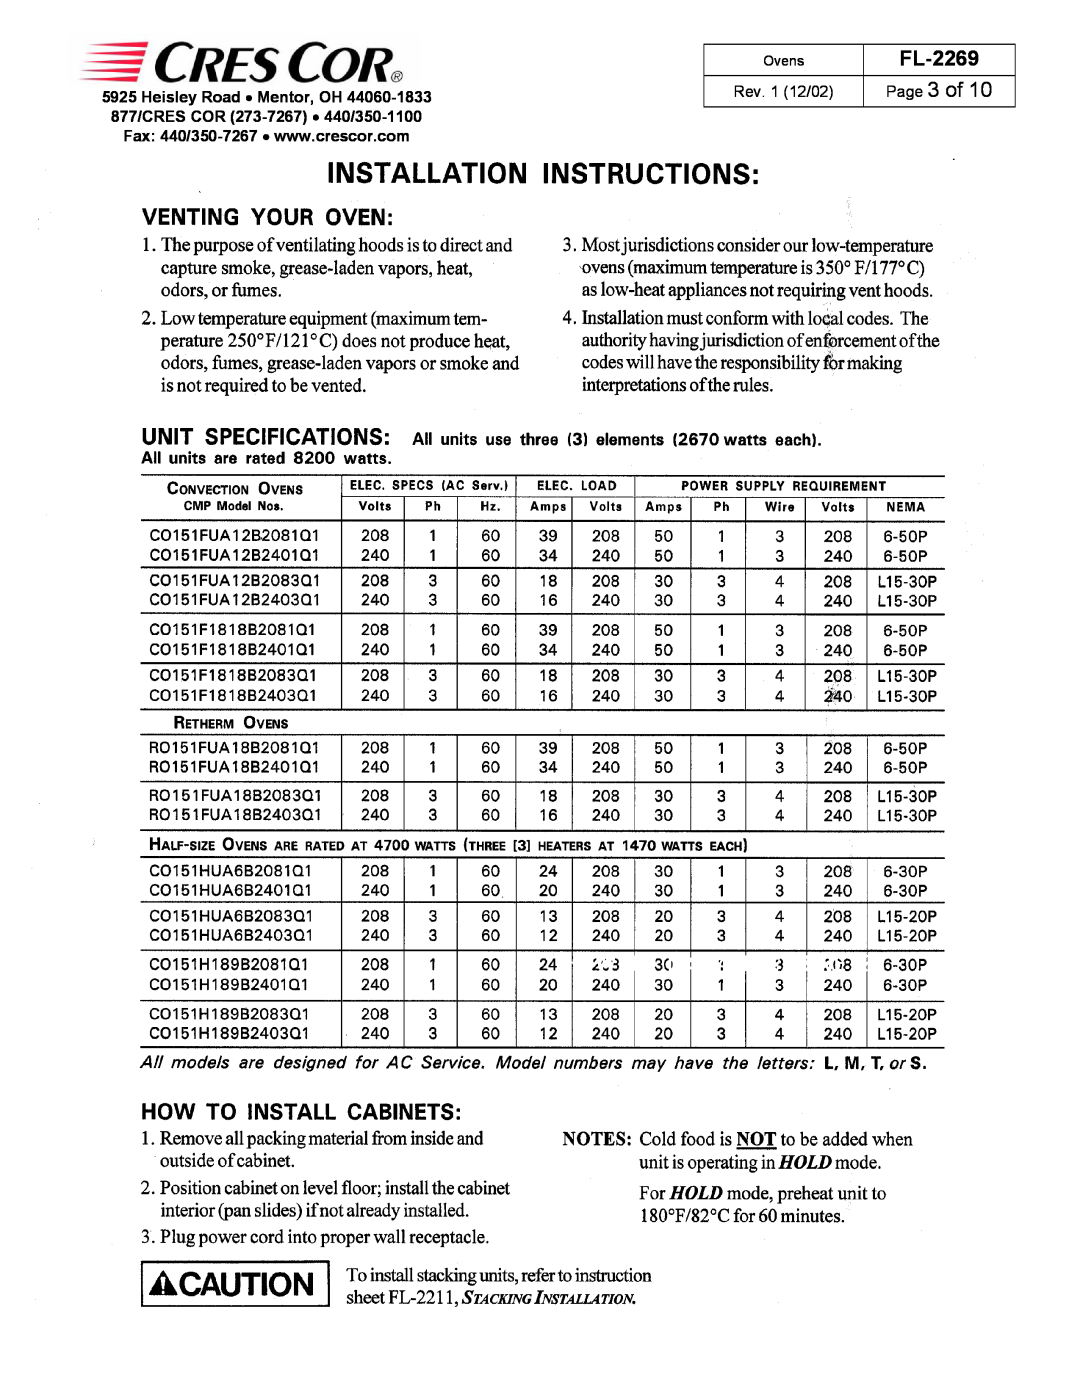 Cres Cor CO151F1818B, CO151HUA6B, CO151H189B, RO151FUA18B, CO151FUA12B manual FL-2269, Page 3 of, Rev. 1 12/02, Ovens 